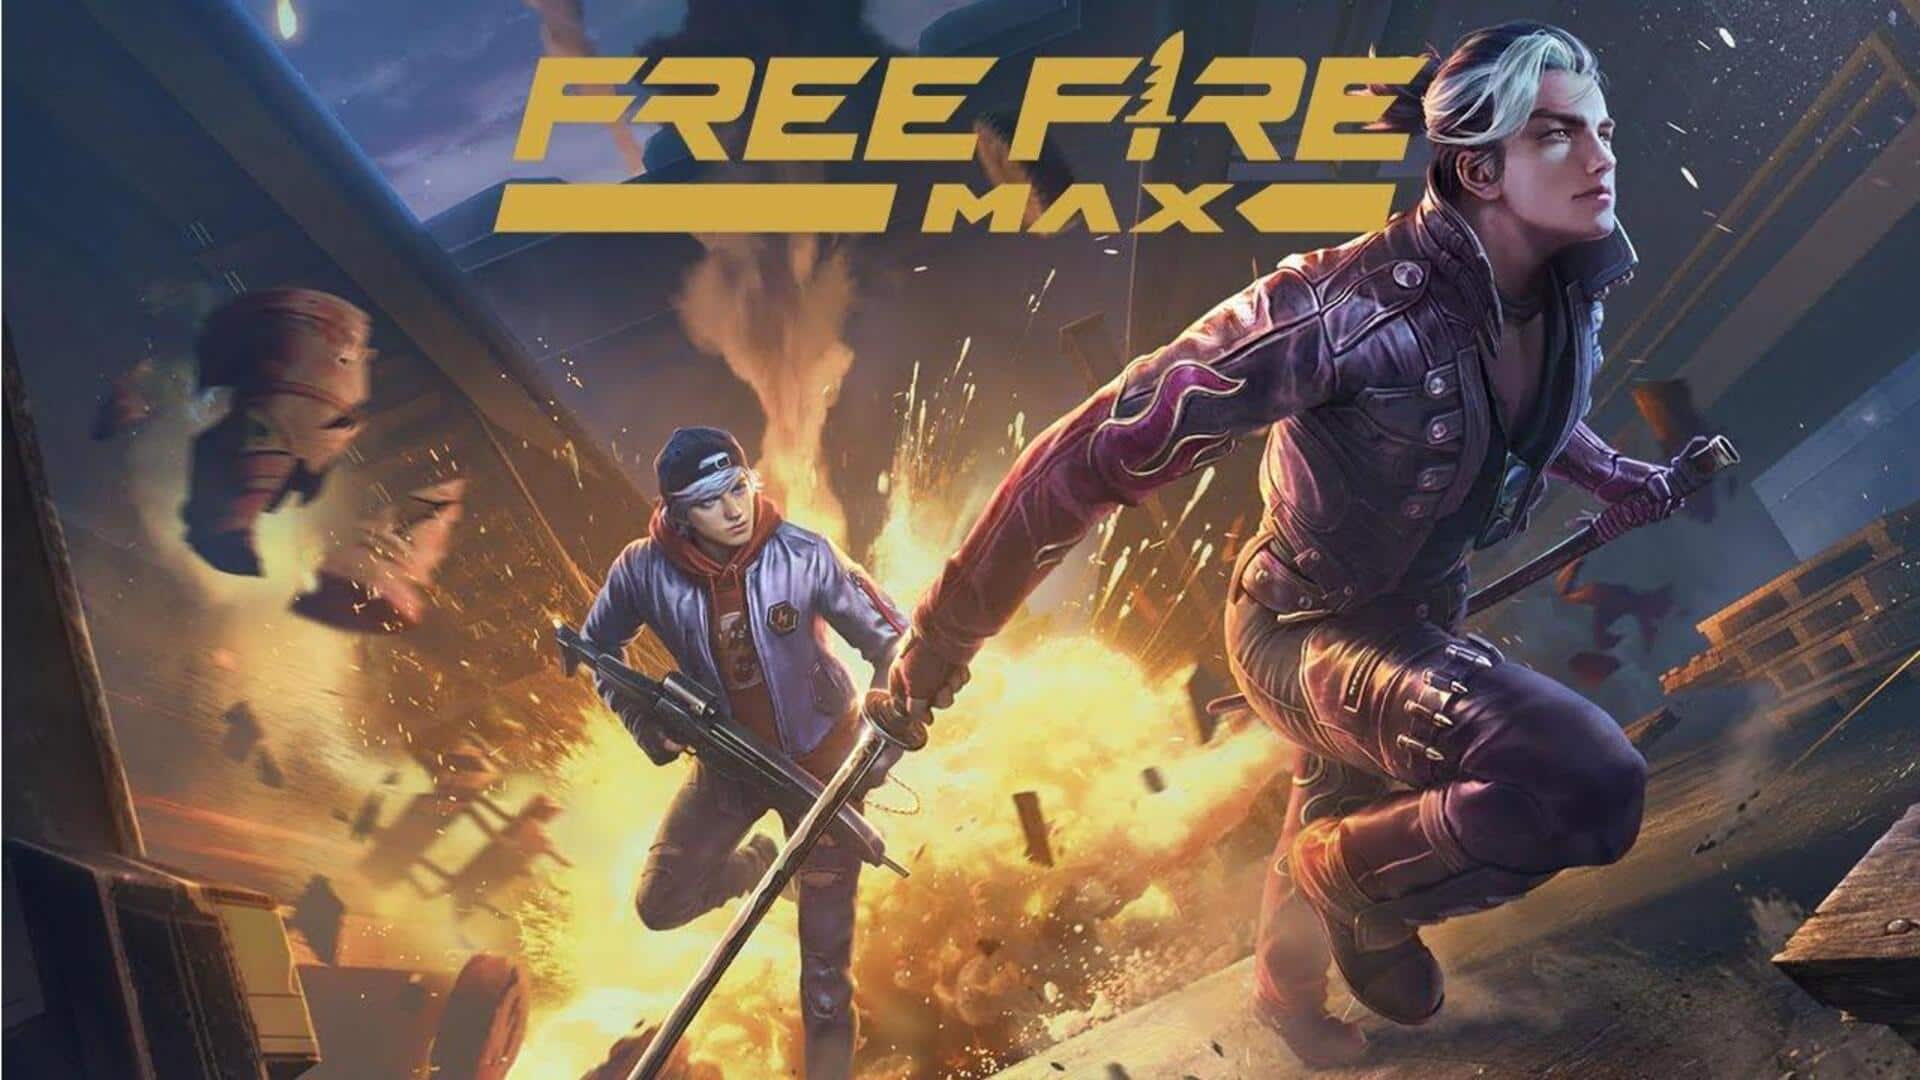 Garena Free Fire redeem codes for August 8: Check redeem codes to